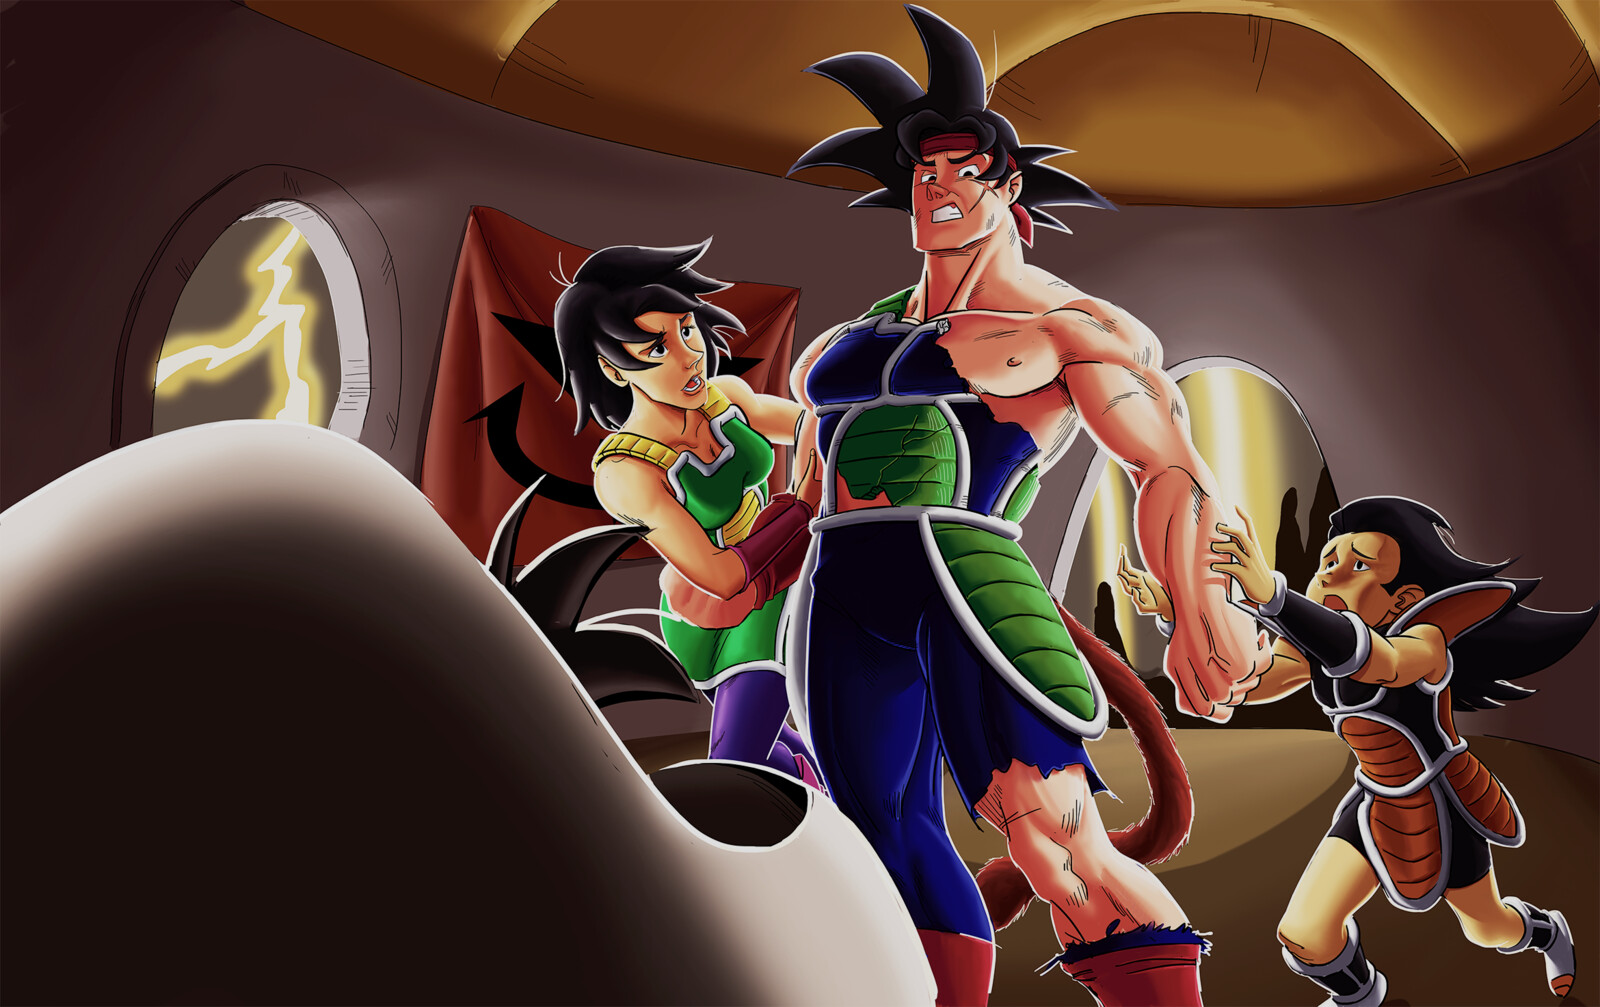 Bardock, father of Goku, had a vision of the destruction of his home planet and decides to send his son away... to Earth (2019)